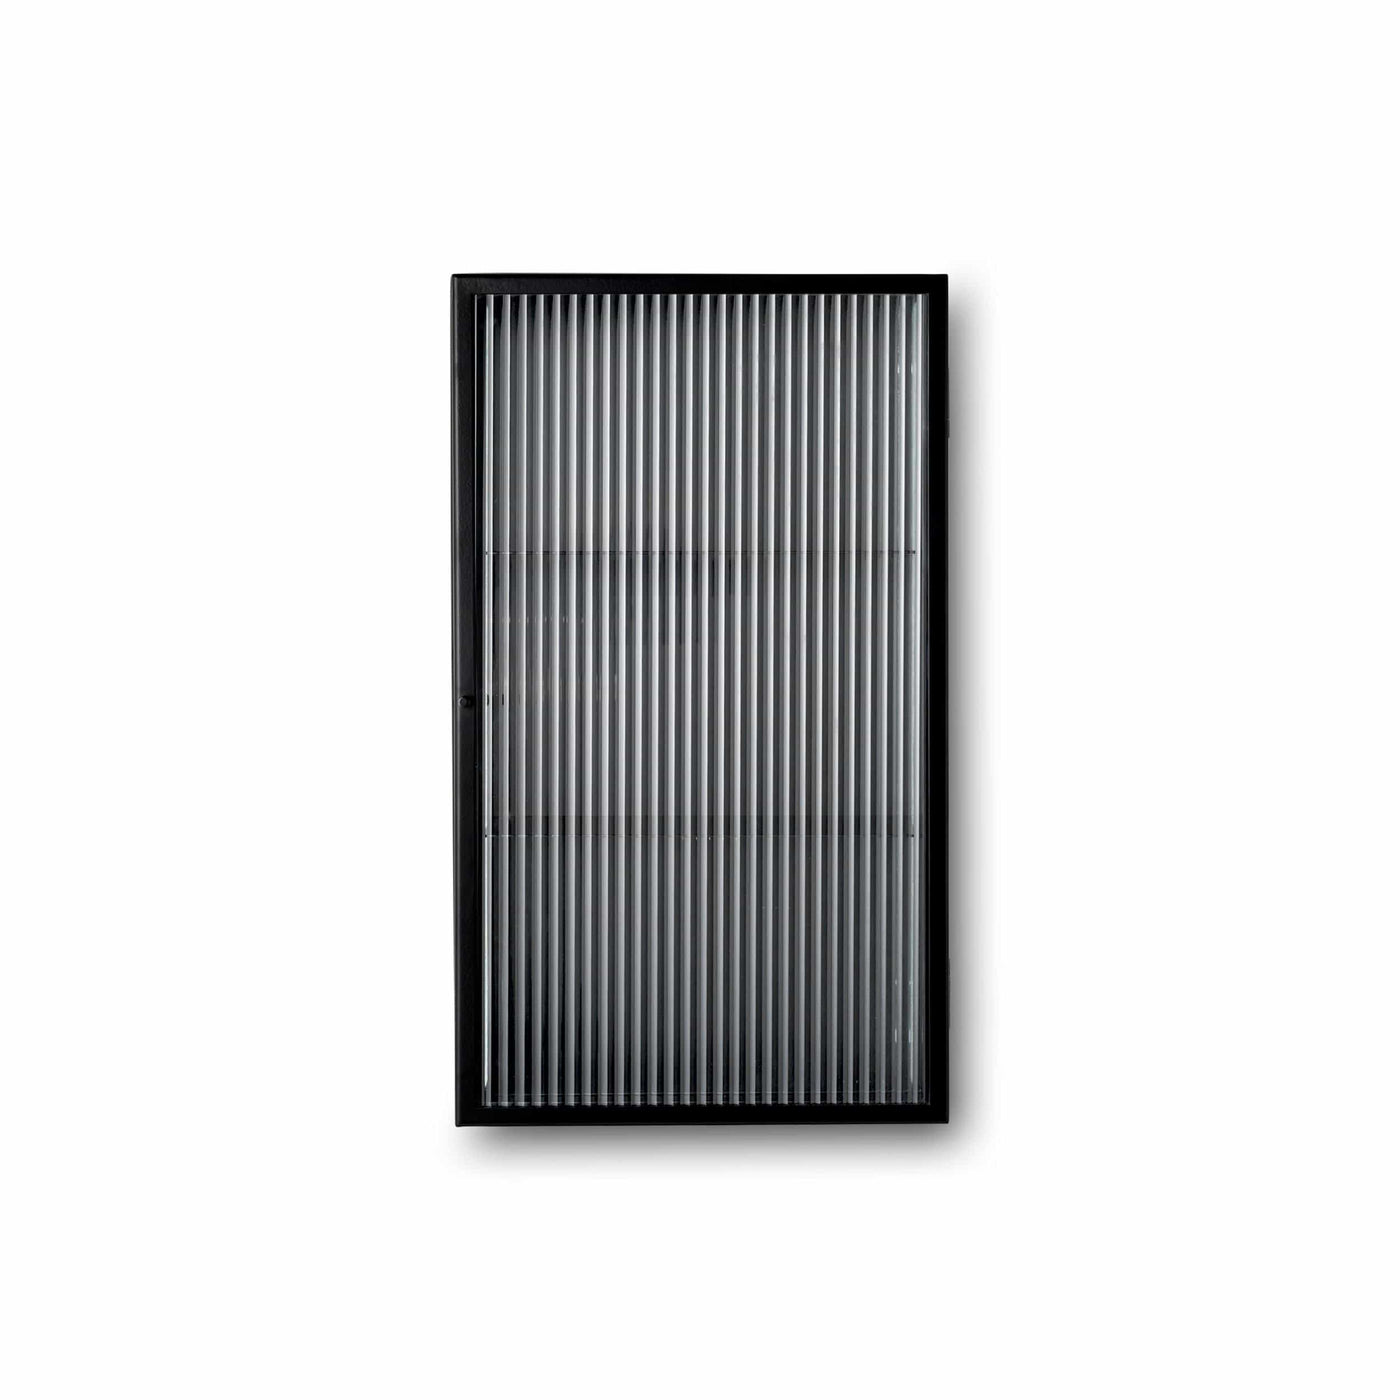 Ferm Living Haze Wall Cabinet in black. Shop now at someday designs